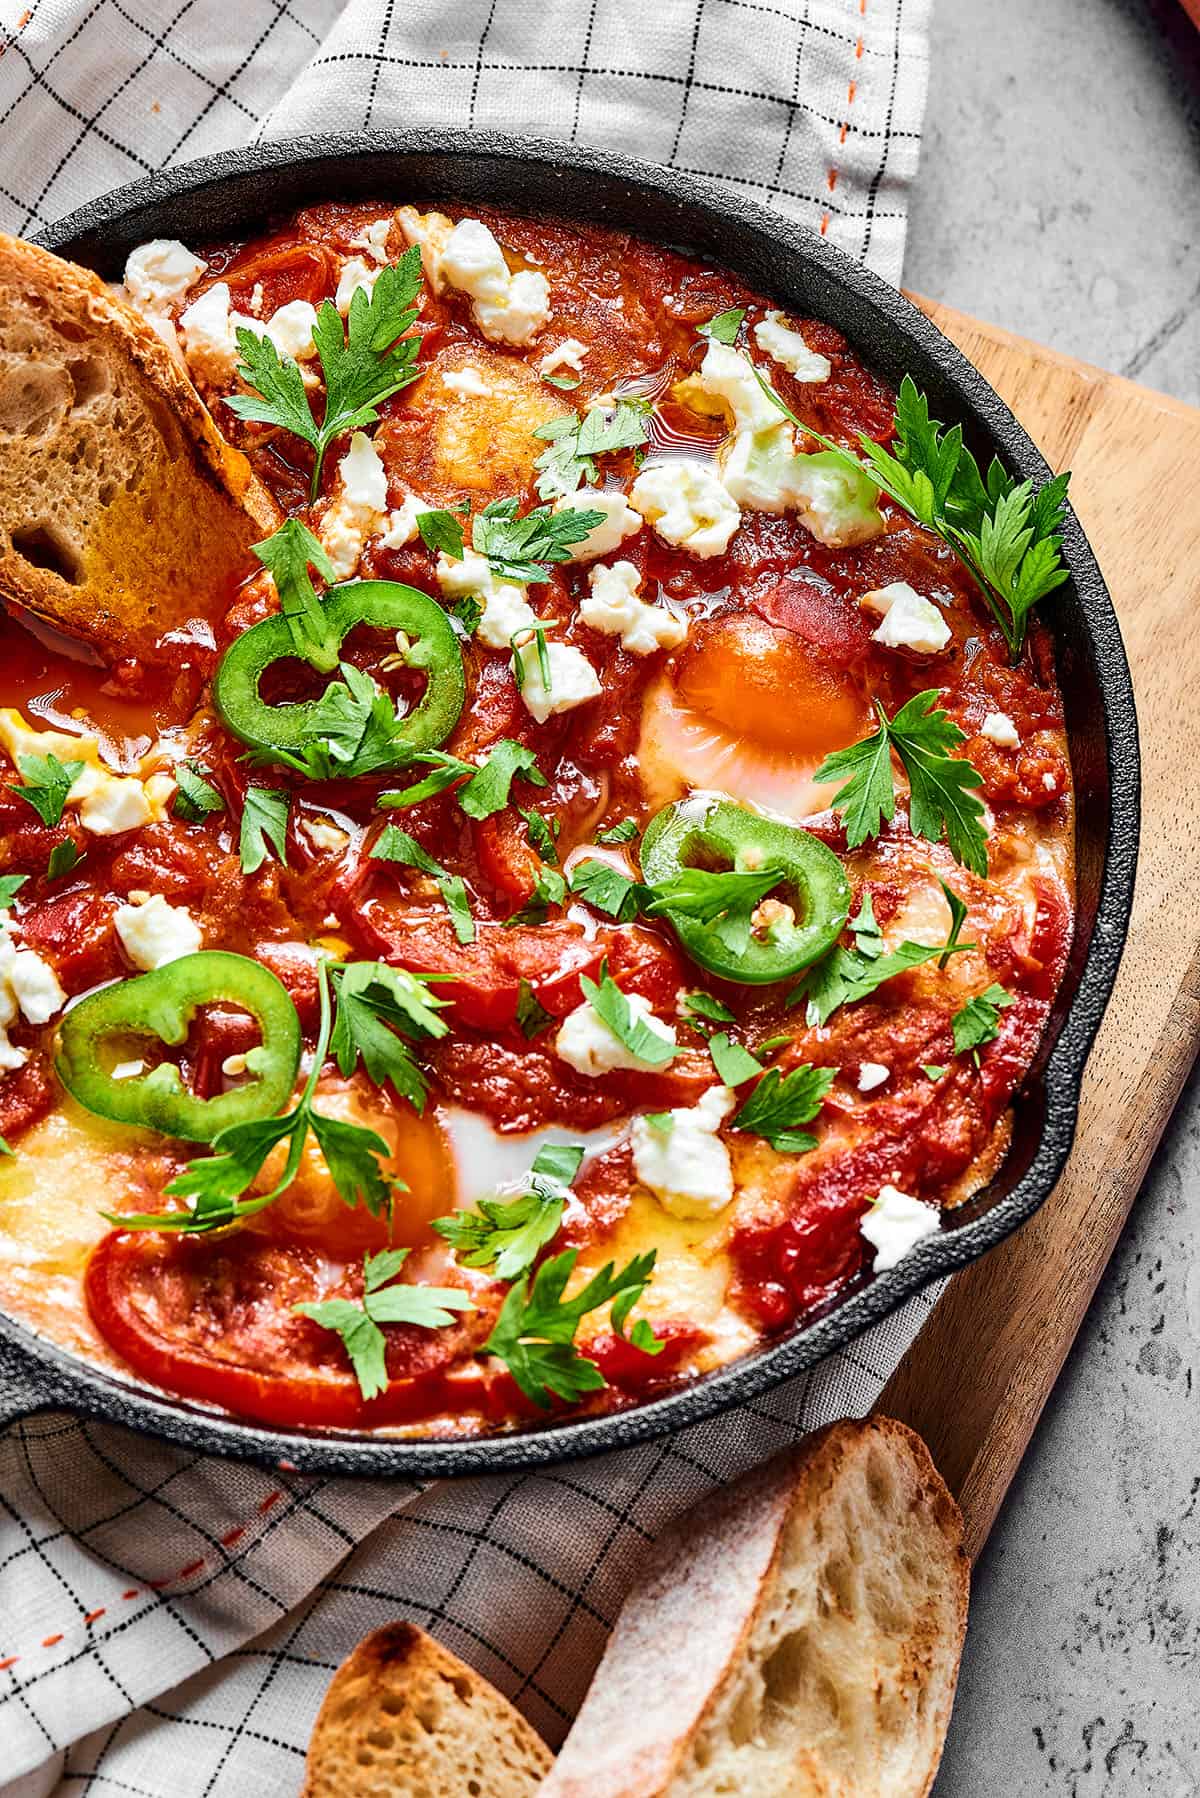 Overhead shot of shakshuka in a cast-iron skillet, with toasted baguette.